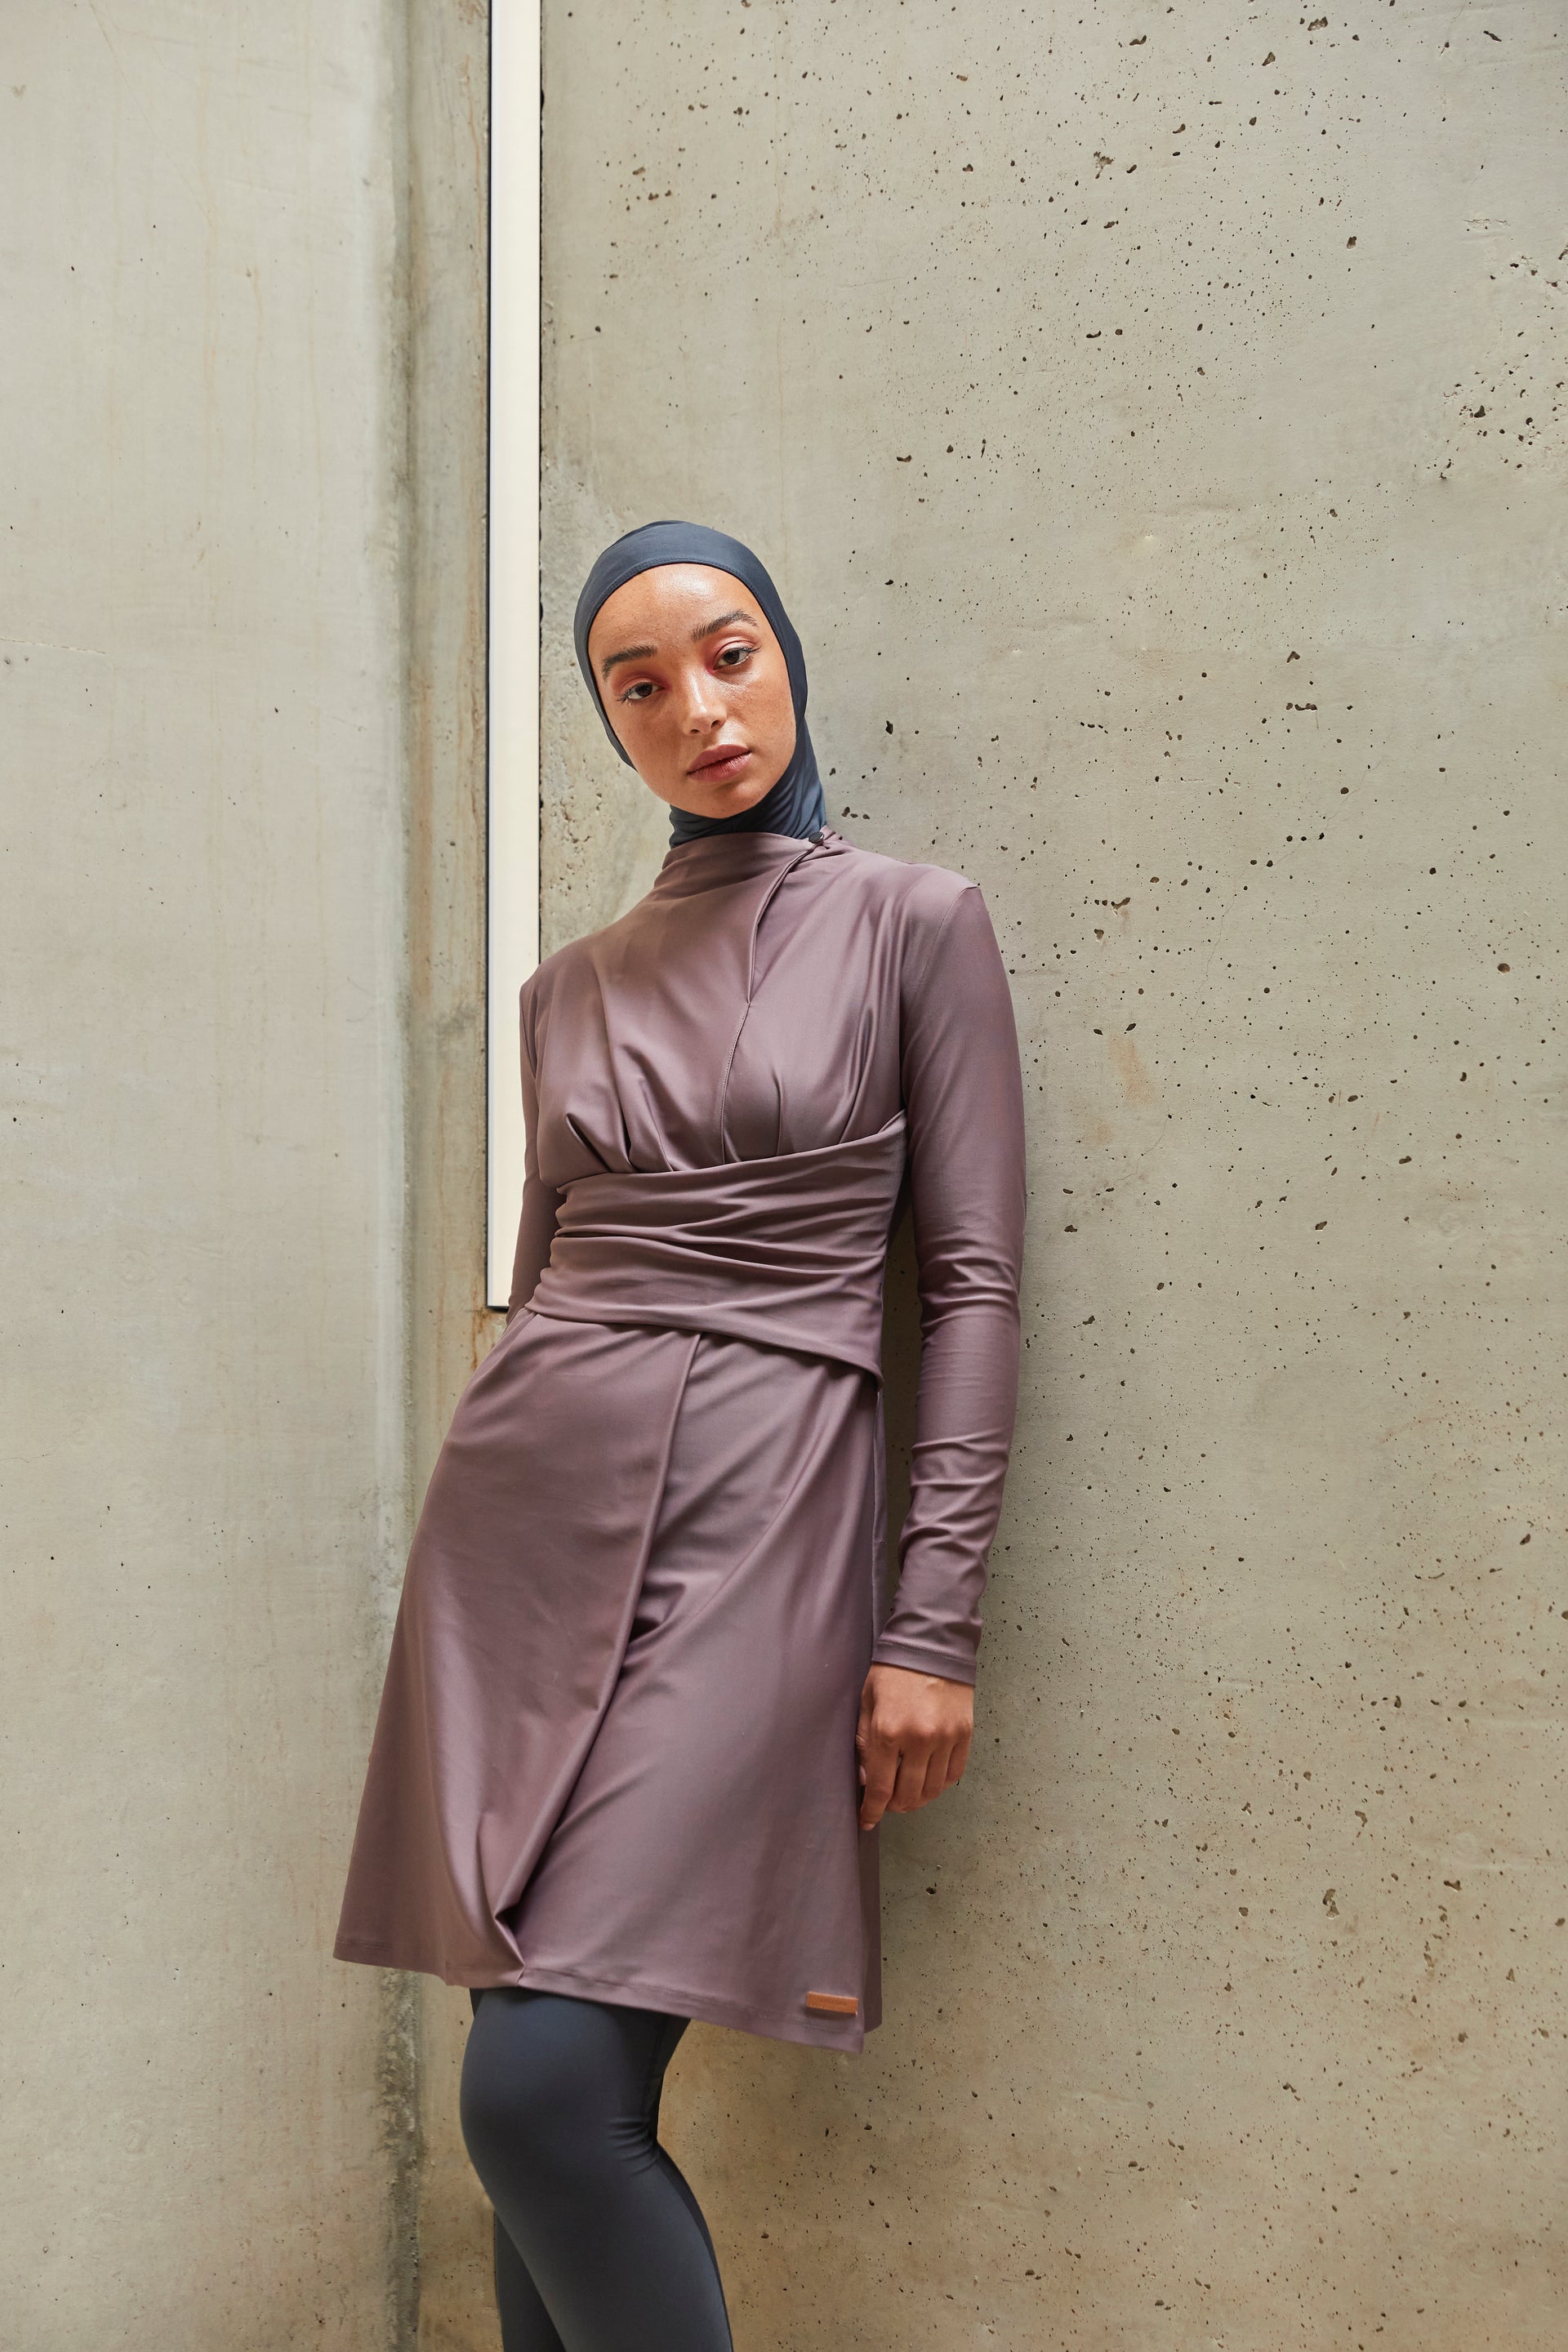 Green Leaves Full Coverage | Burkini Remsa | Modest workout clothes,  Swimwear outfit, Burkini